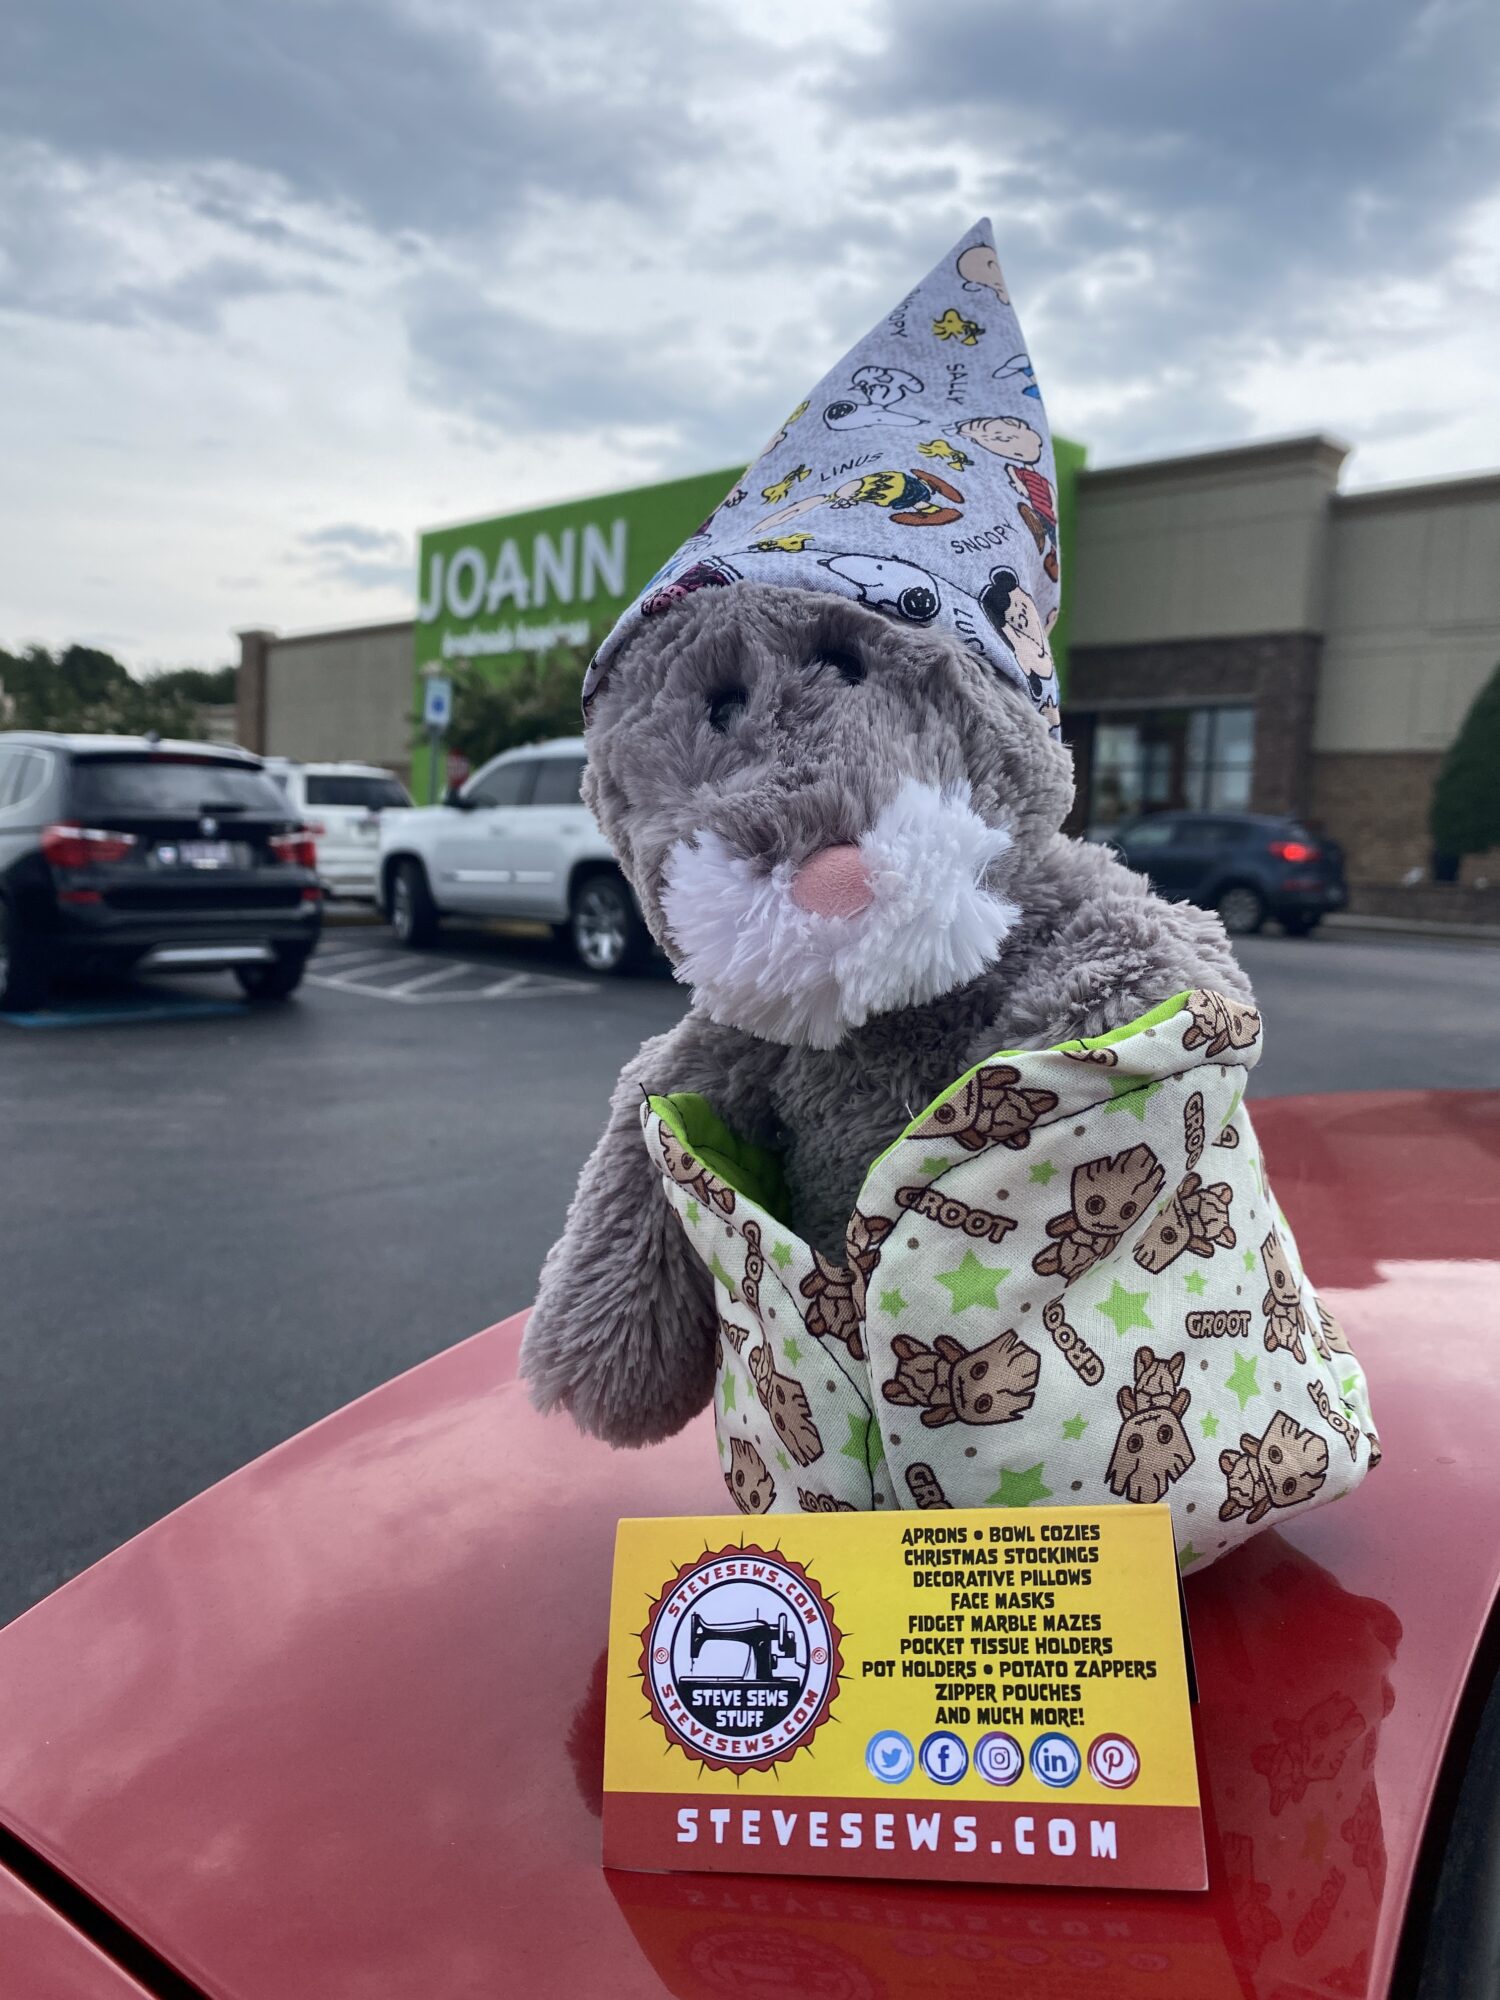 Gandalf is showing off his wizard hat and bowl cozy, served as seat for him and checking out the new huge Knoxville JoAnn’s off Morrell Drive by West Town Mall. #Knoxville #joannfabrics #gandalf JOANN Fabric and Craft Stores